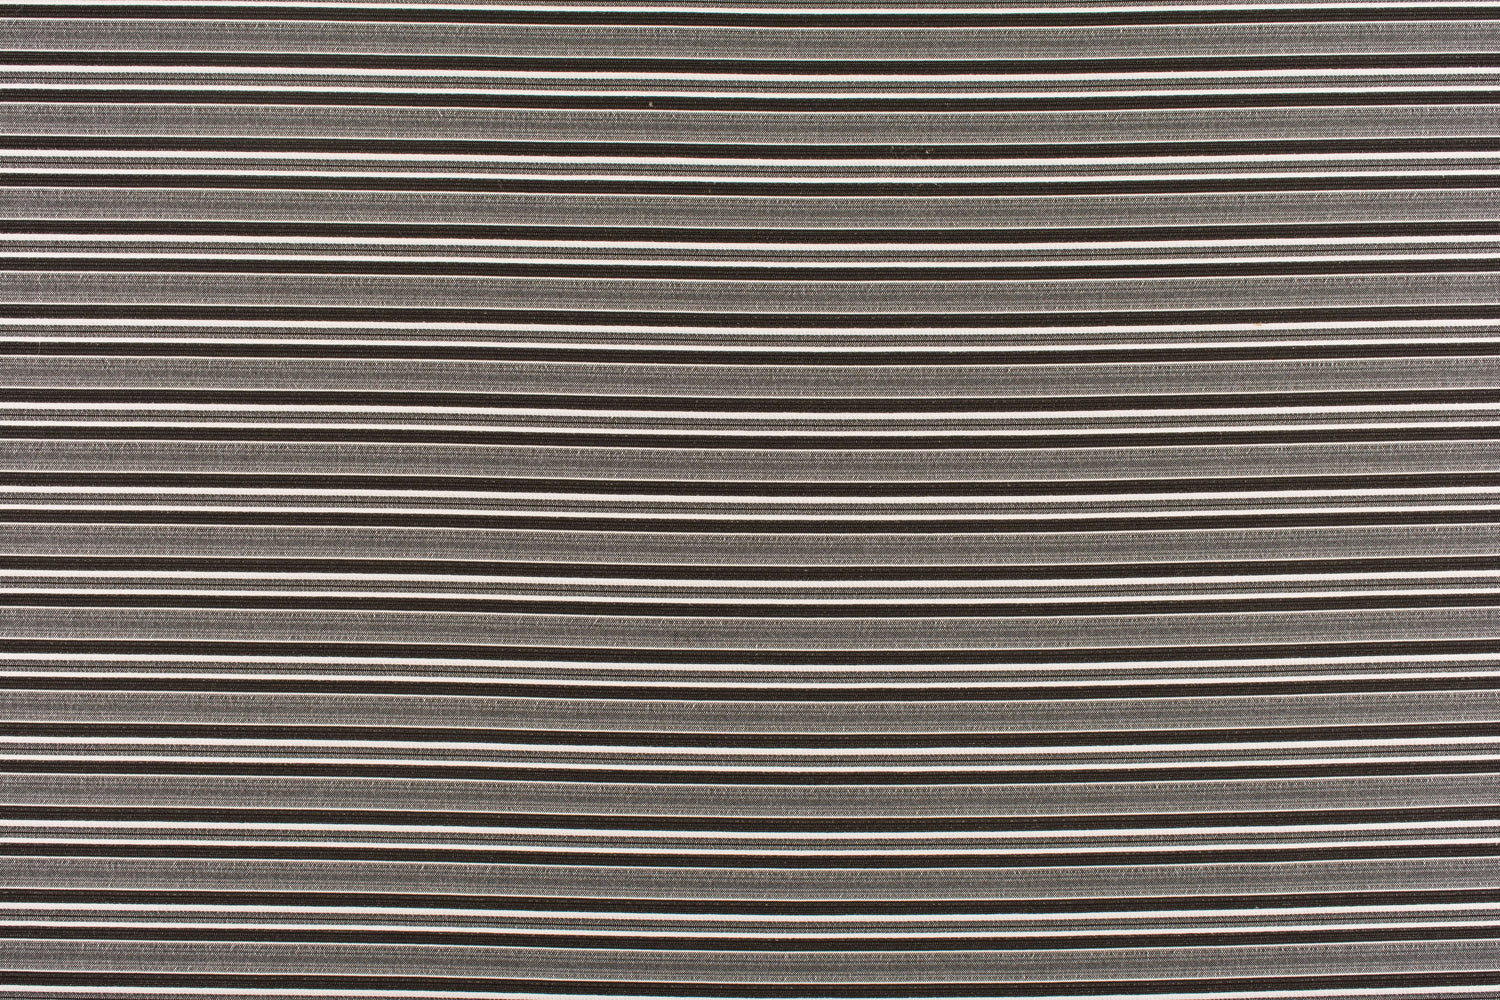 Steps Beach fabric in coal color - pattern number WR 00072661 - by Scalamandre in the Old World Weavers collection